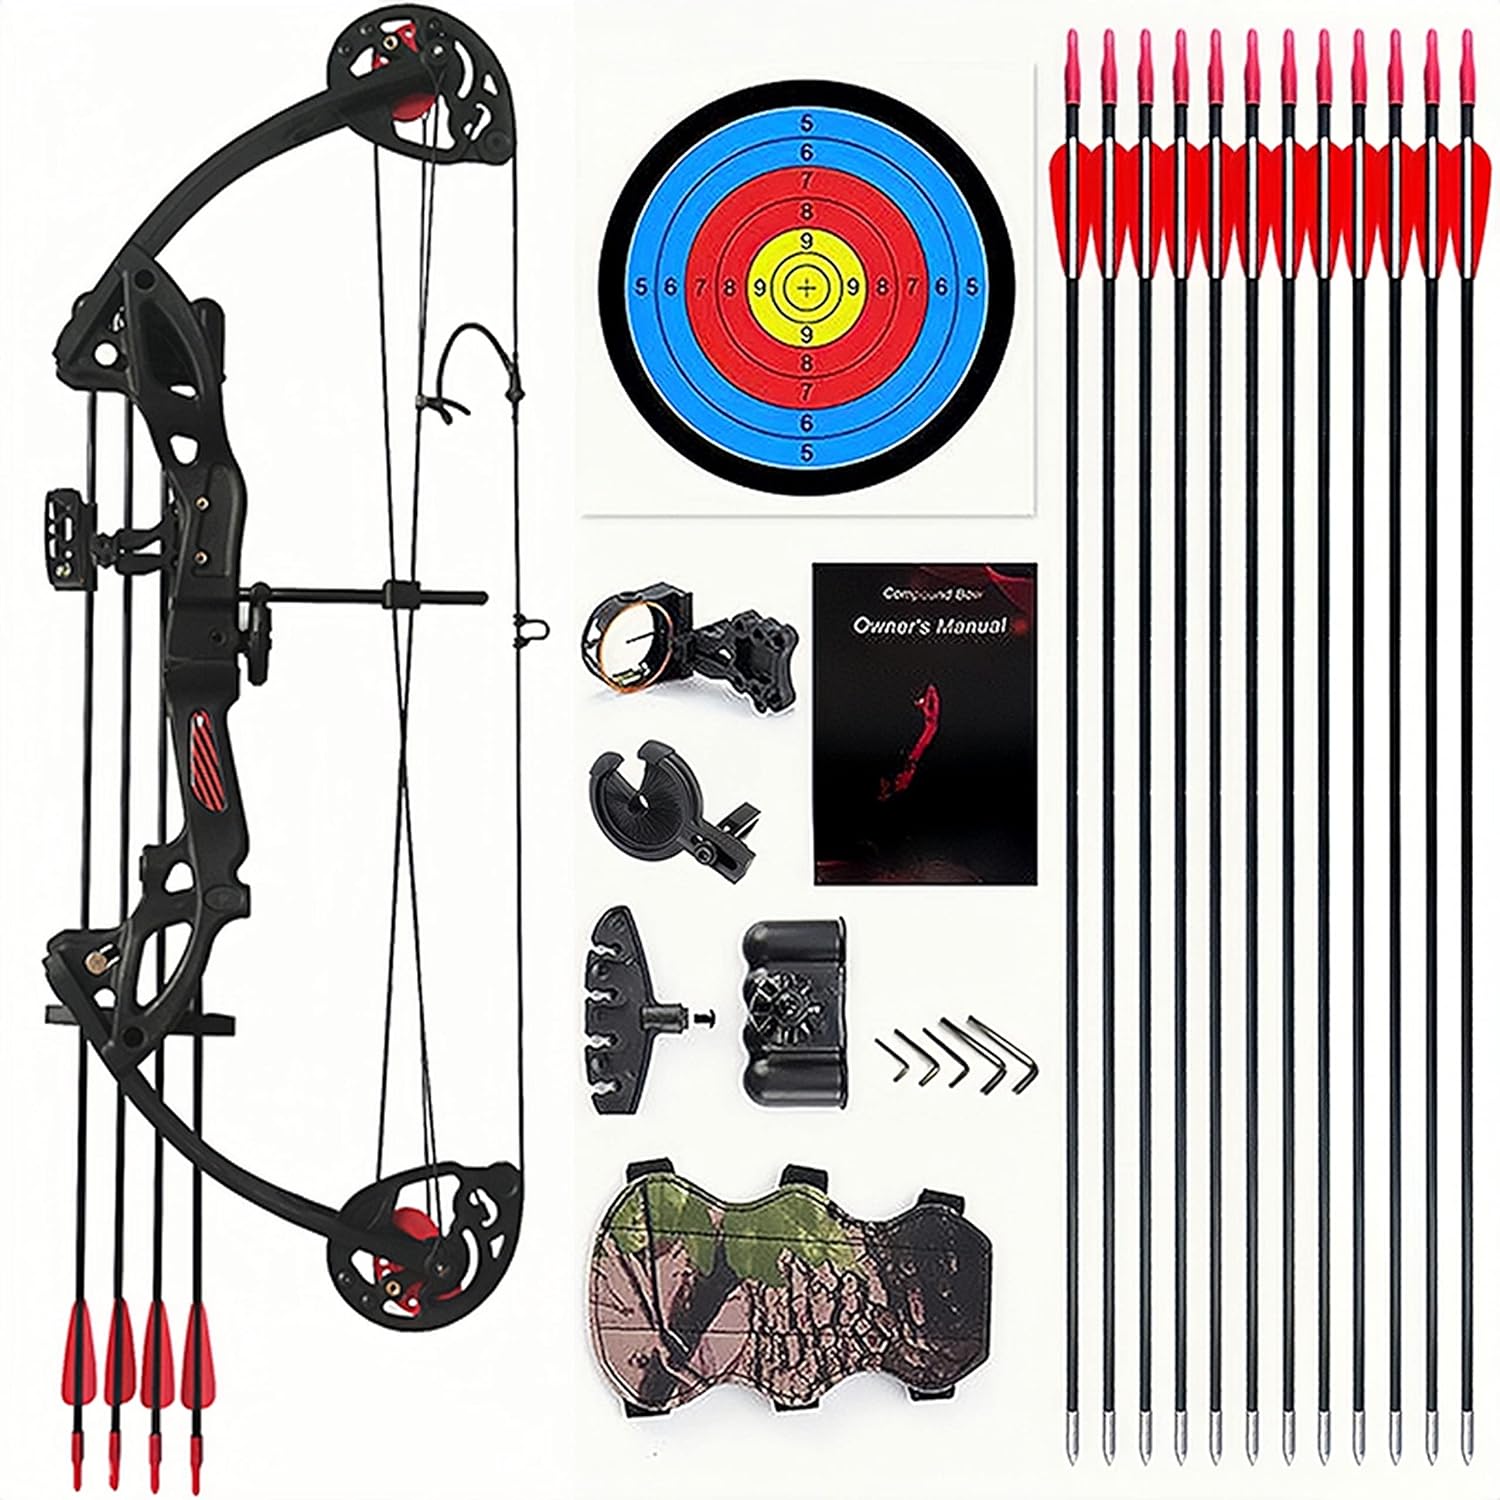 Lanneret's Compound Bow and Archery Sets will make archery accessible to beginners, while providing precision, safety, and quality.